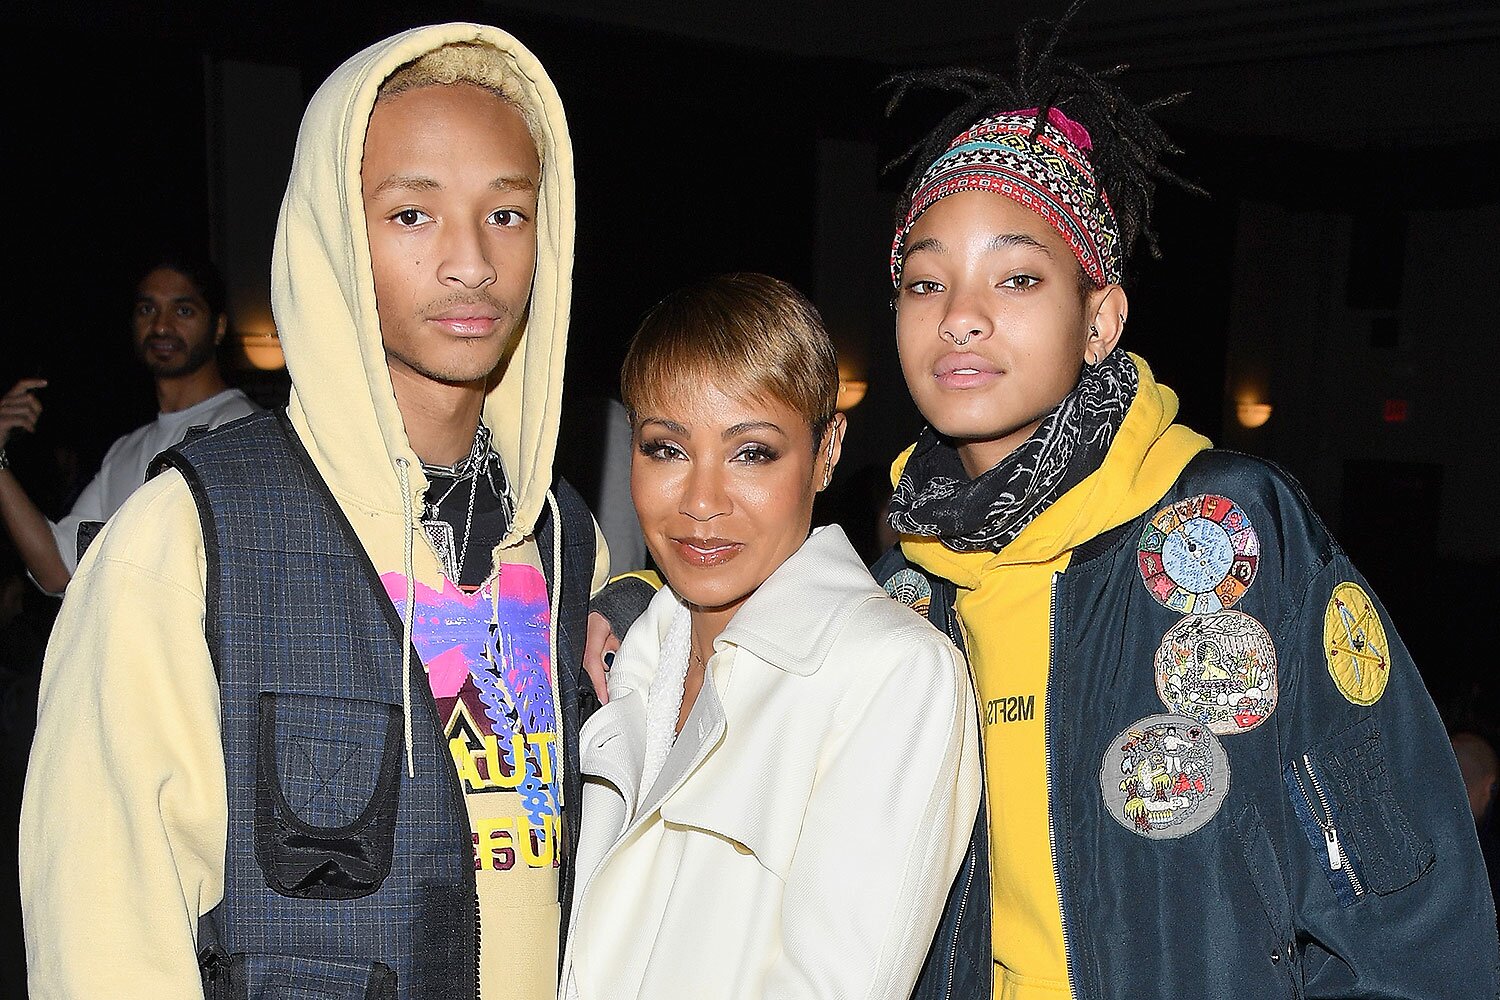 FACTS OR REACHING?: Willow Smith Confronts Her Mother; Says “There’s a ...